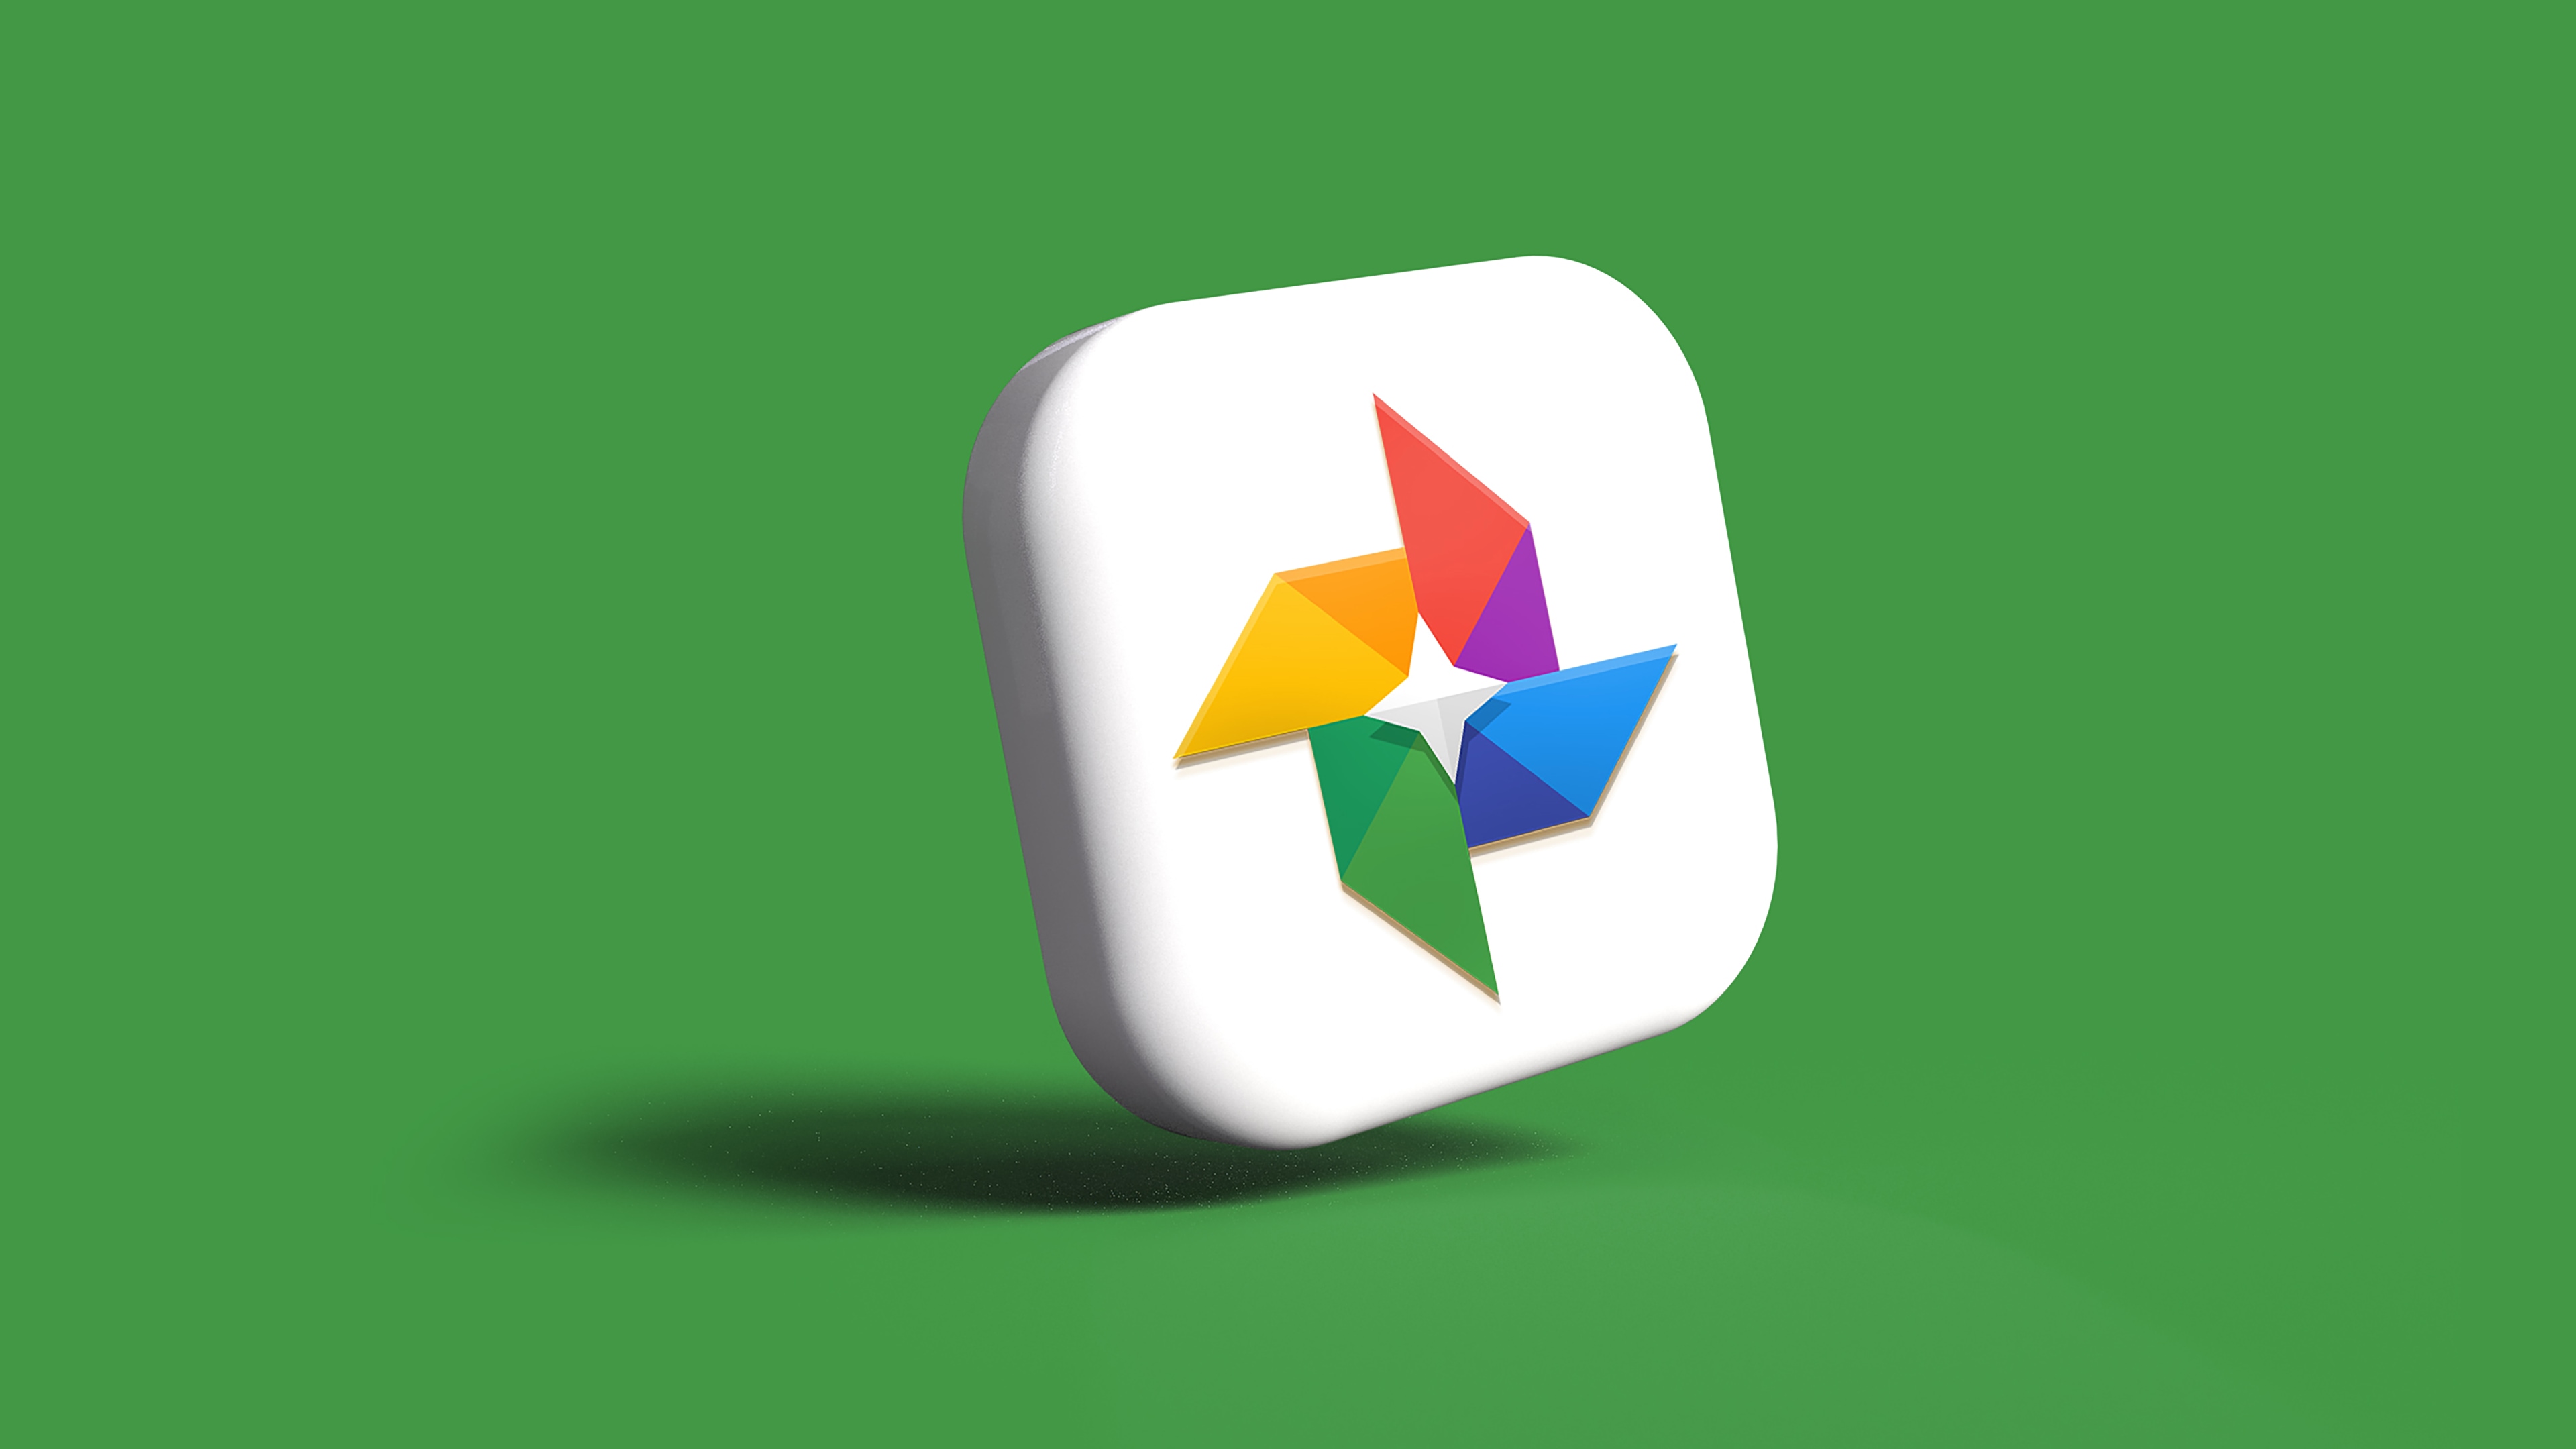 Google Photos has fixed constant crashing for iPhone users on iOS 16.3.1